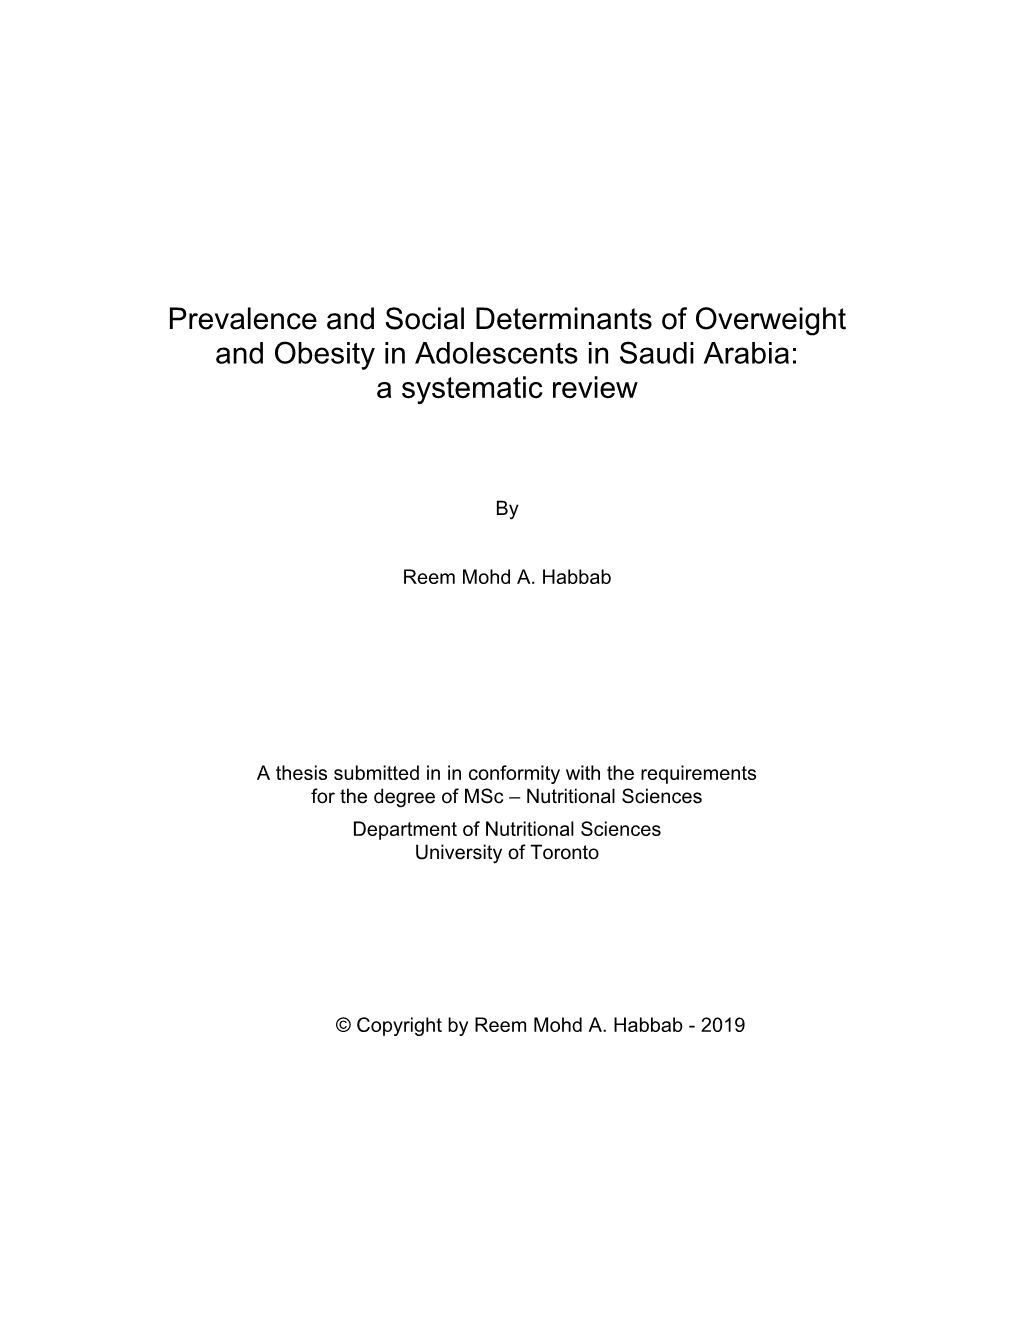 Prevalence and Social Determinants of Overweight and Obesity in Adolescents in Saudi Arabia: a Systematic Review